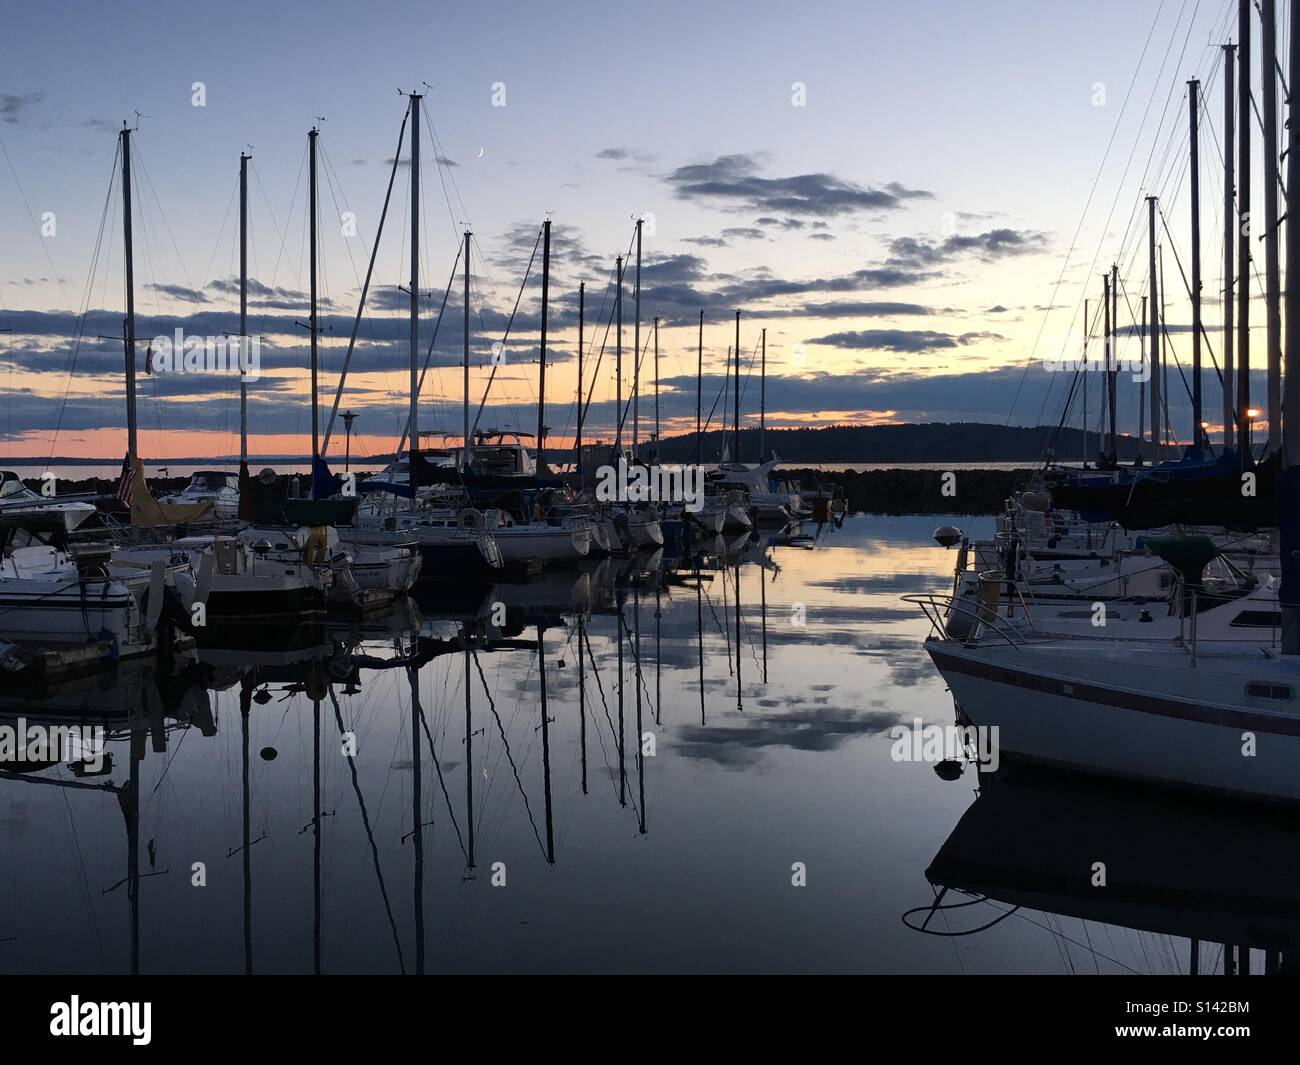 Peaceful Reflections of a late summer evening. Stock Photo